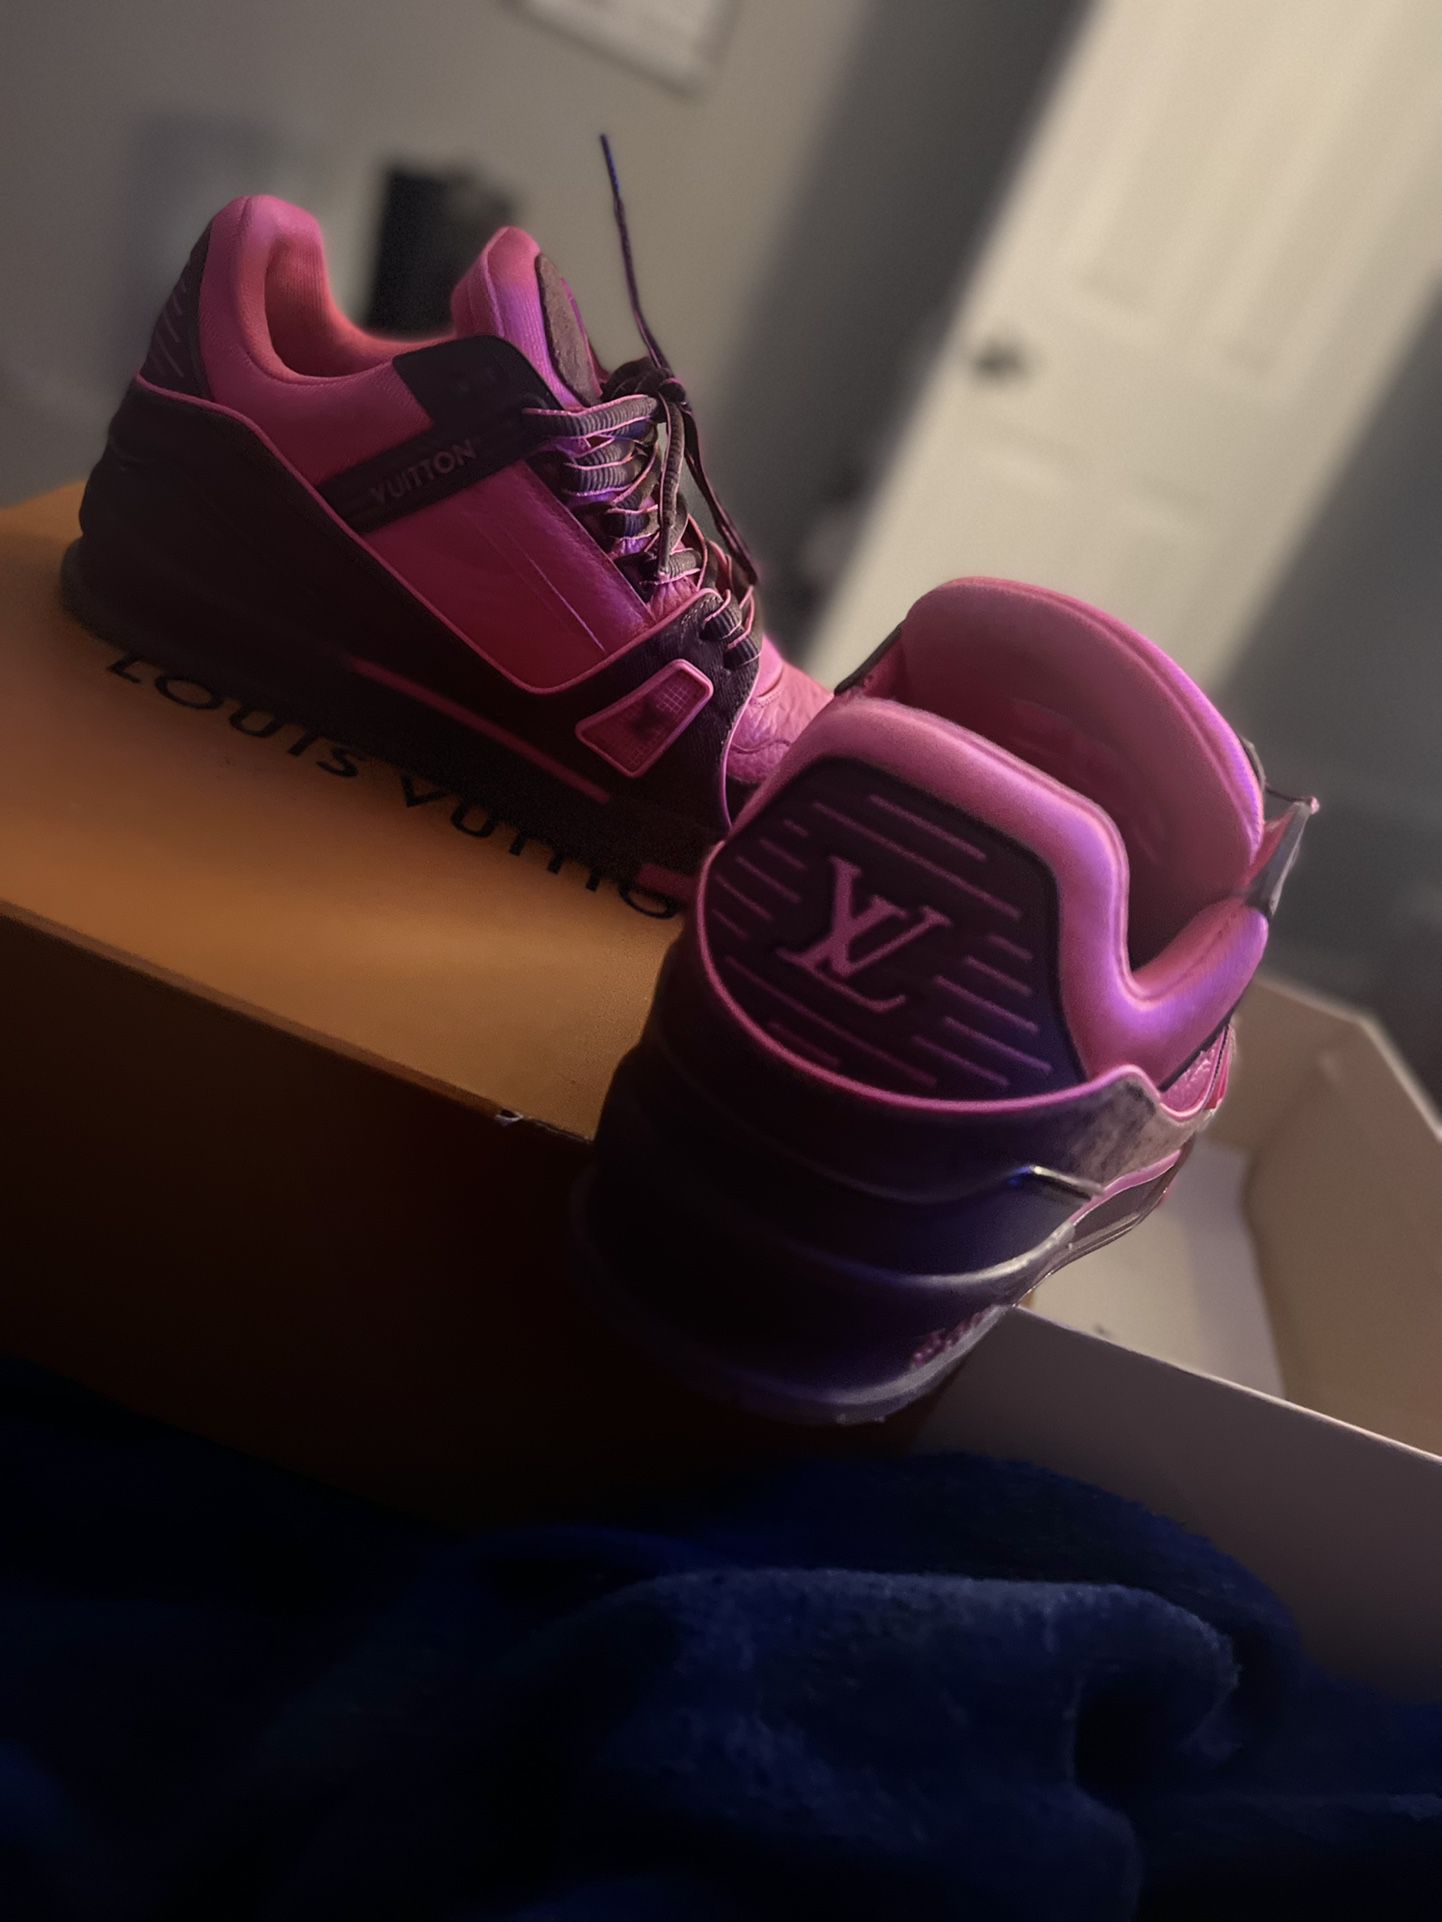 pink and brown lv trainer sneaker｜TikTok Search